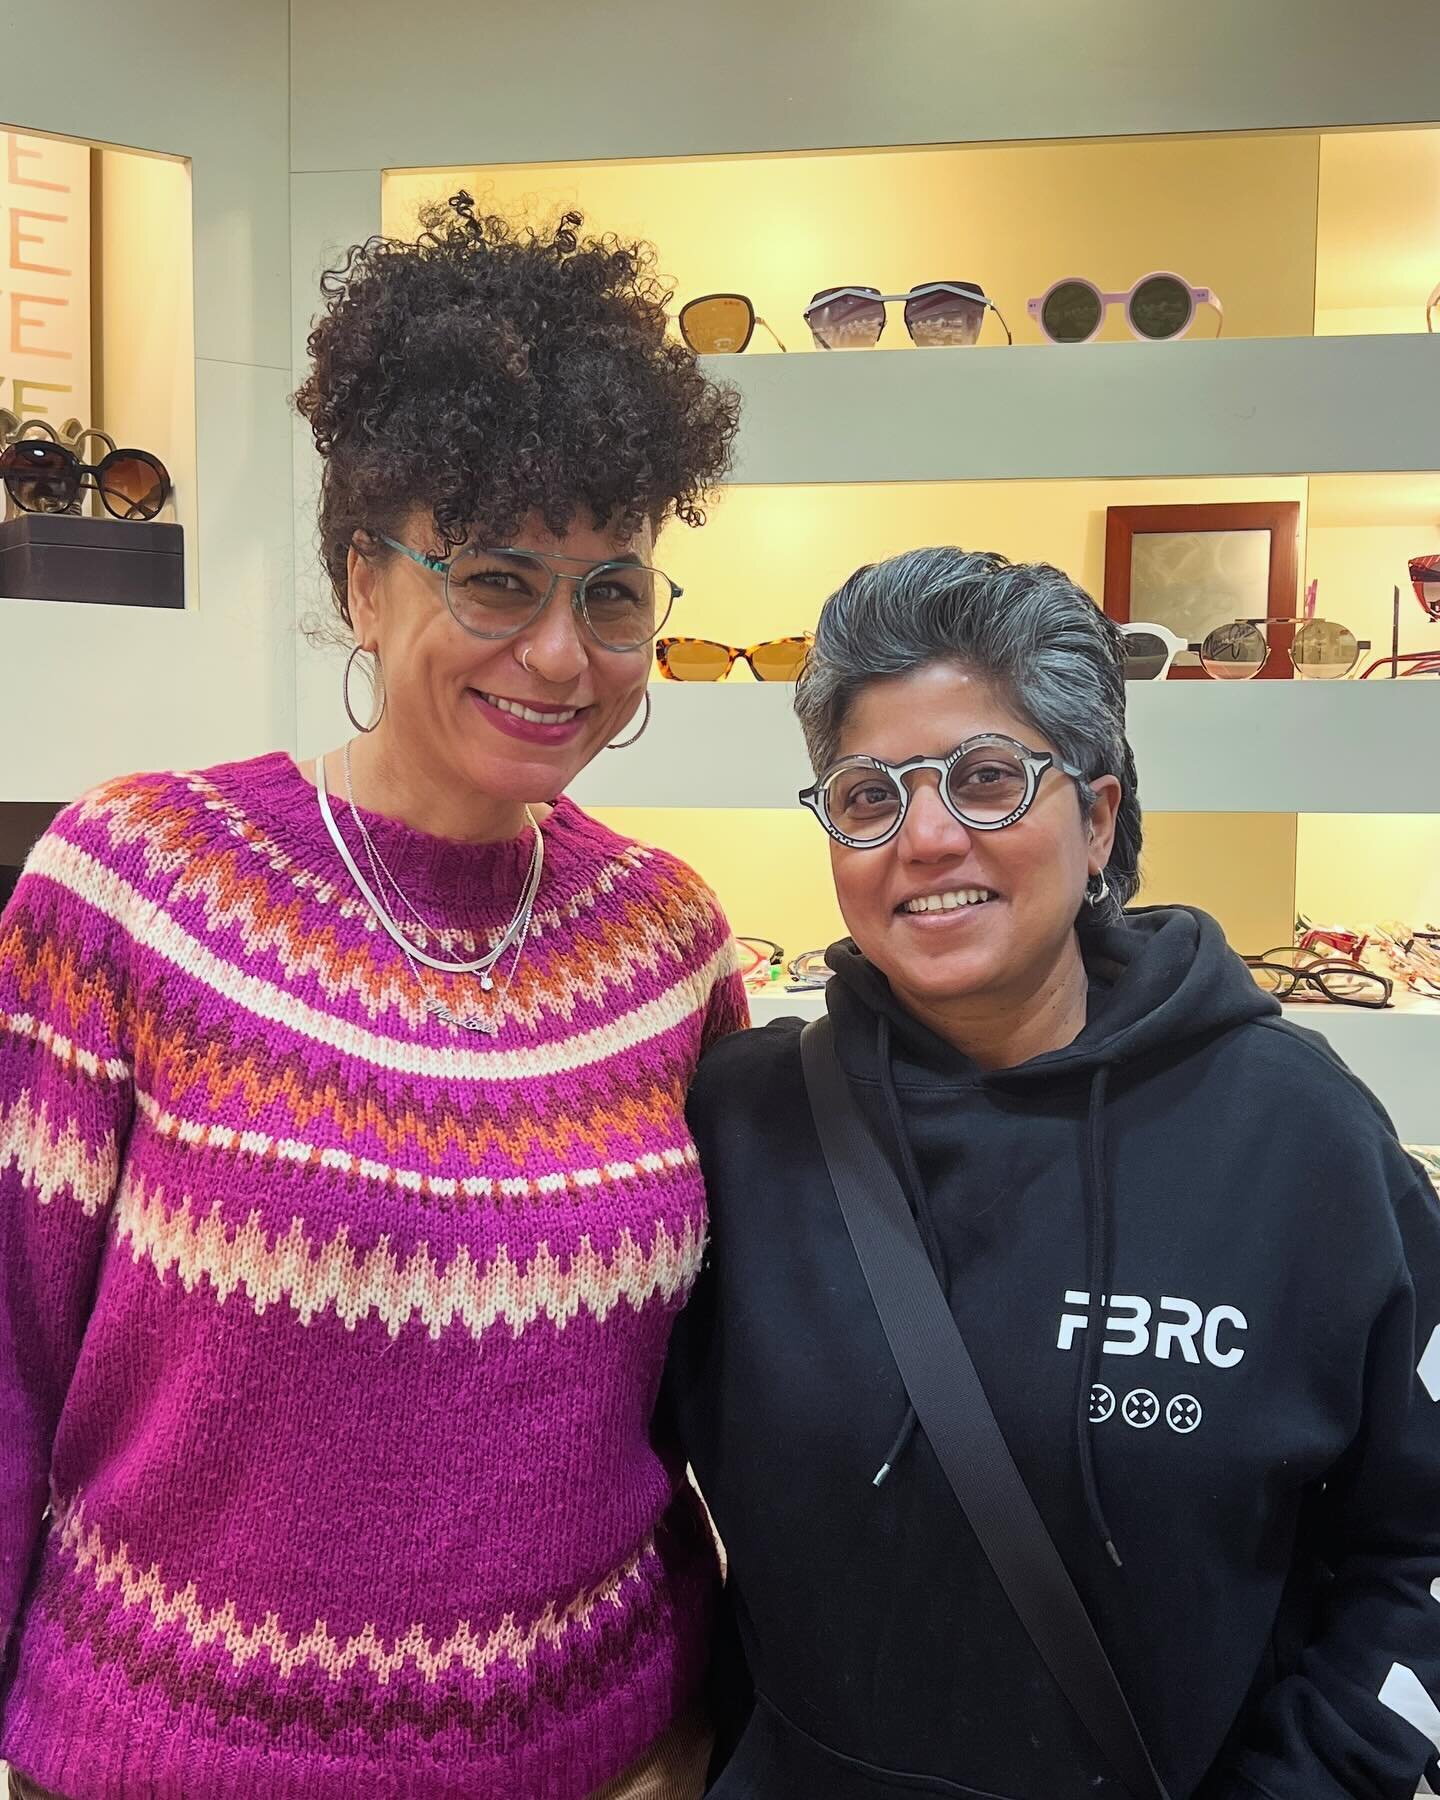 Mari Eva &amp; Queenie Mendes rocking brand new frames from Lindberg and Theo eyewear. What an amazing optical couple!! #Handmade #shopsmall